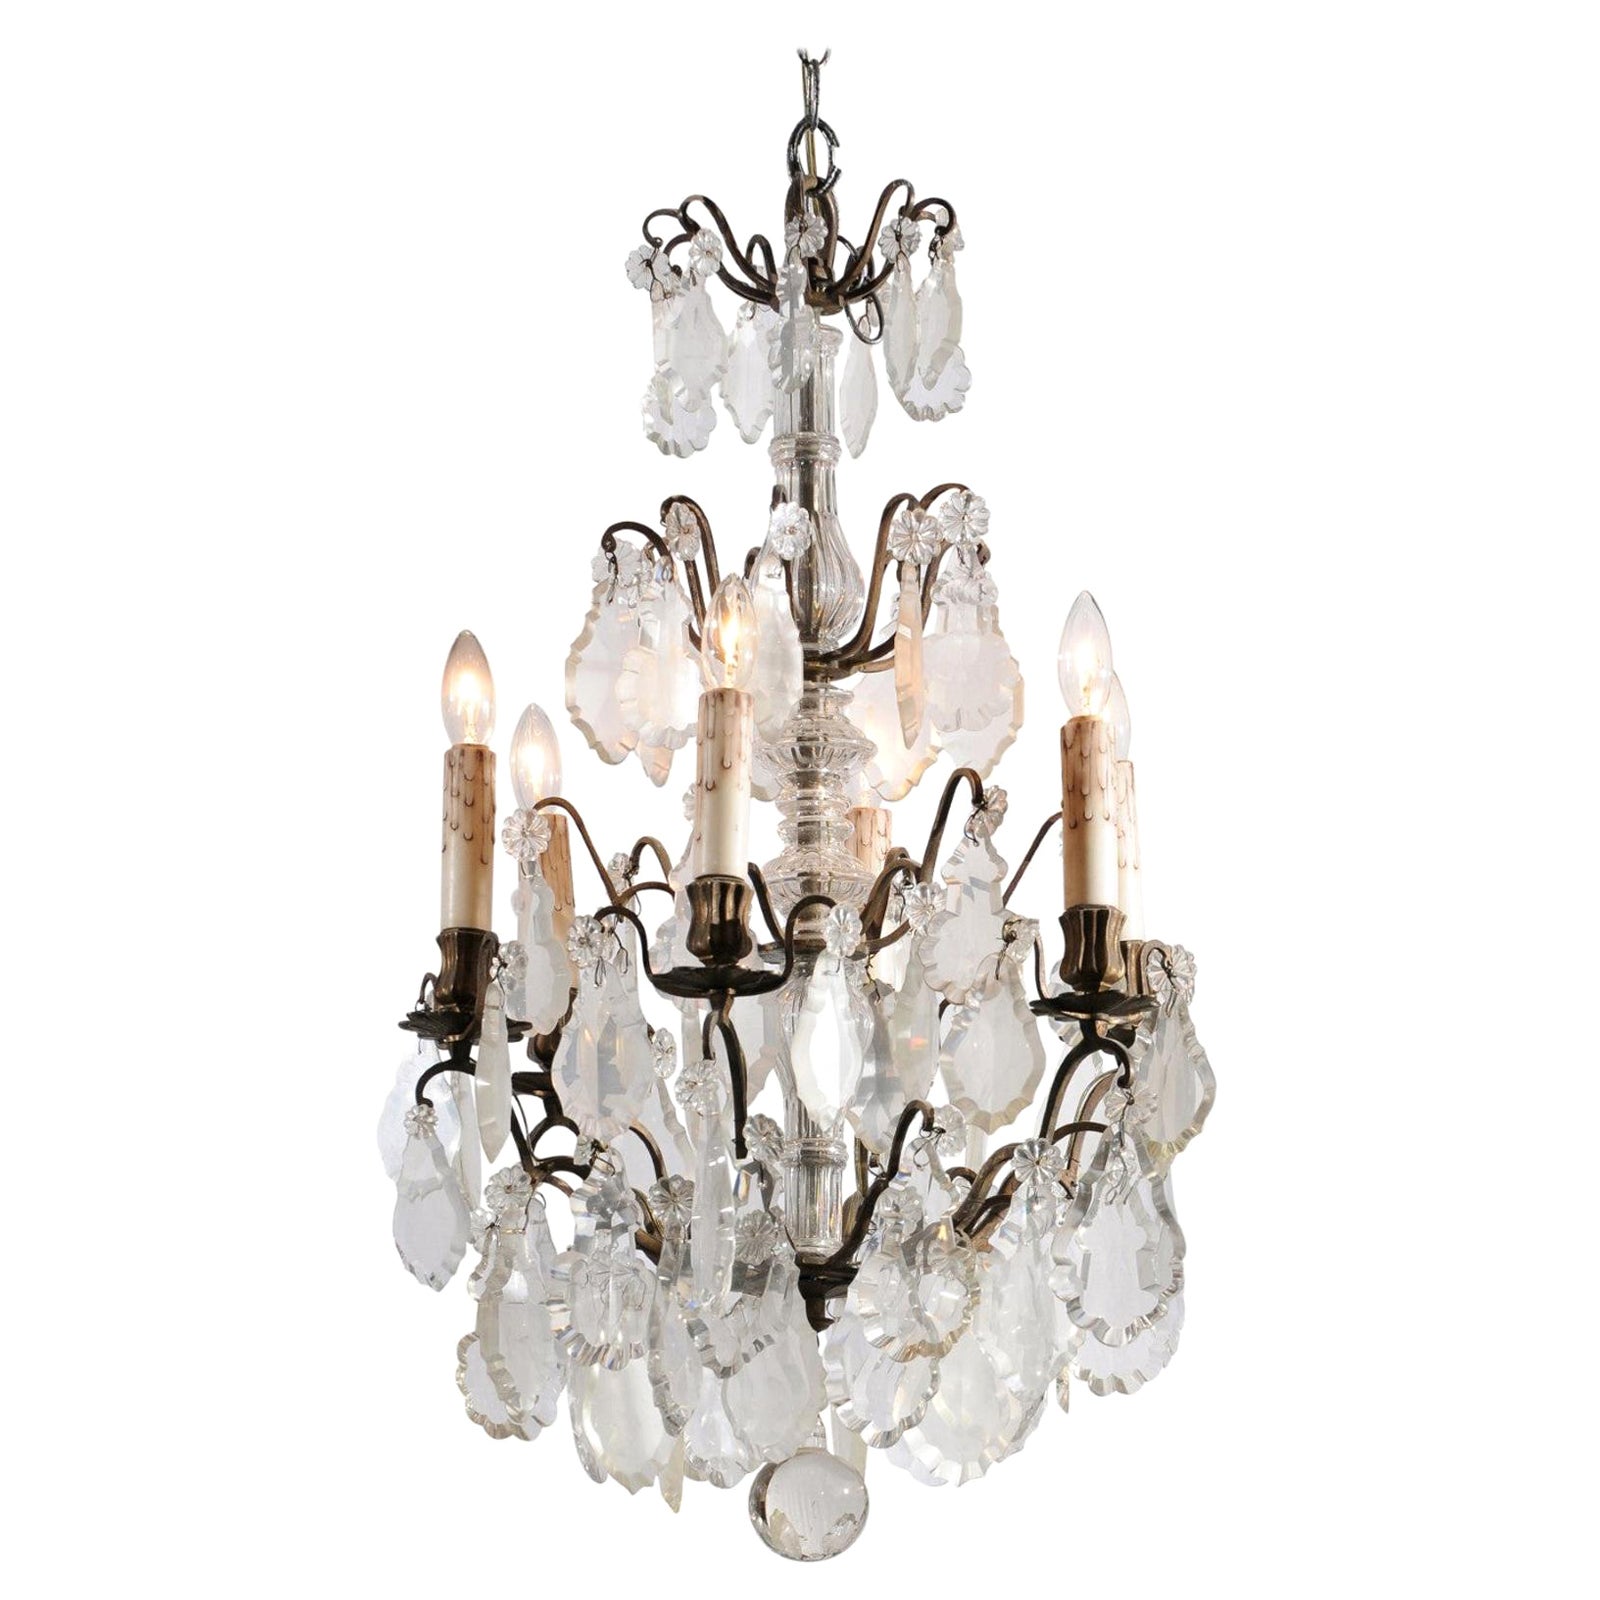 French 19th Century Six-Light Crystal Chandelier with Pendeloques and Rosettes